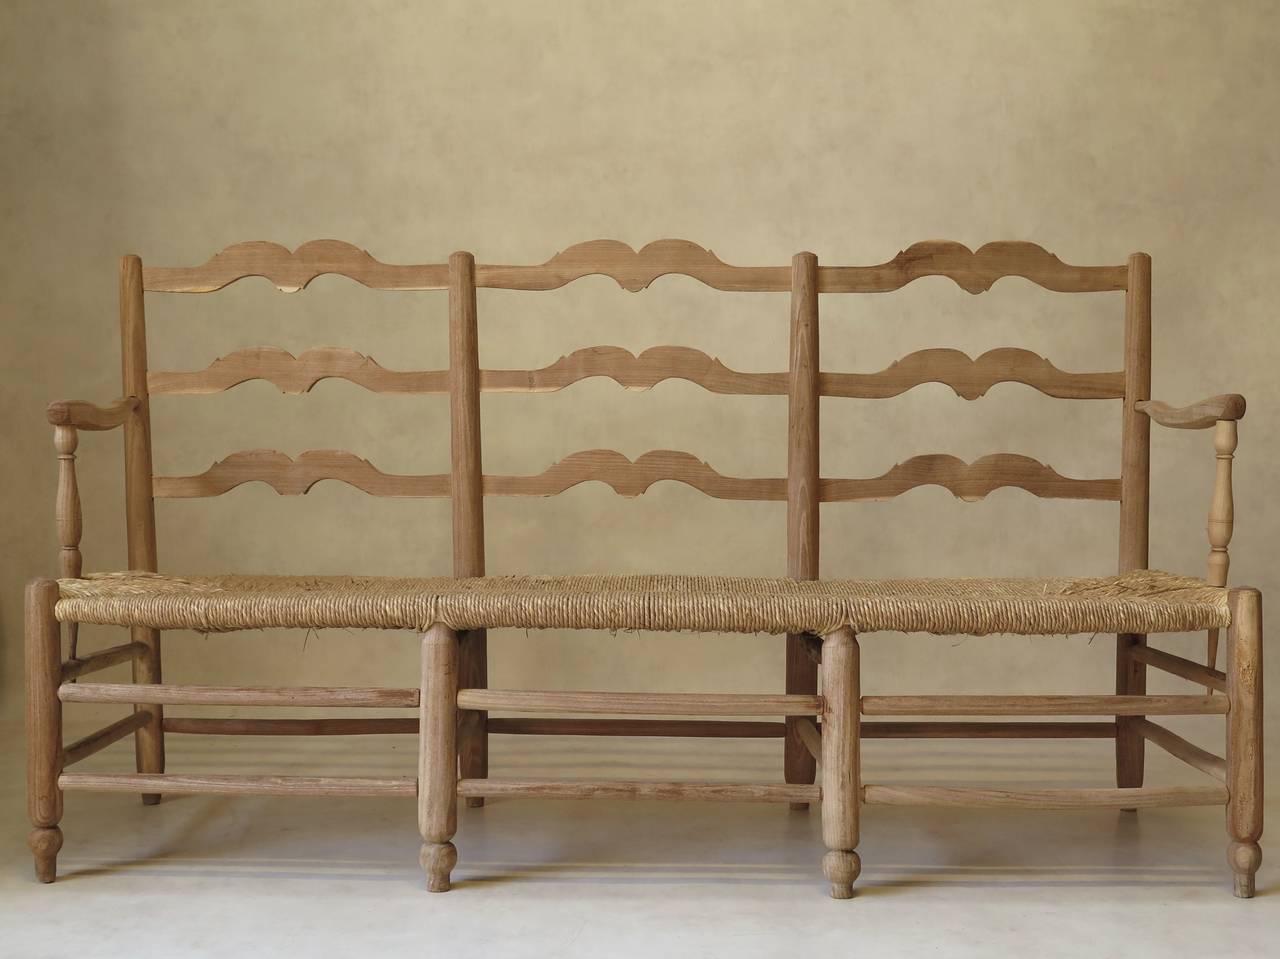 French wood and rush bench or settee (aka radassier) from Provence. Stripped, light-colored wood. Elegant, rustic charm.